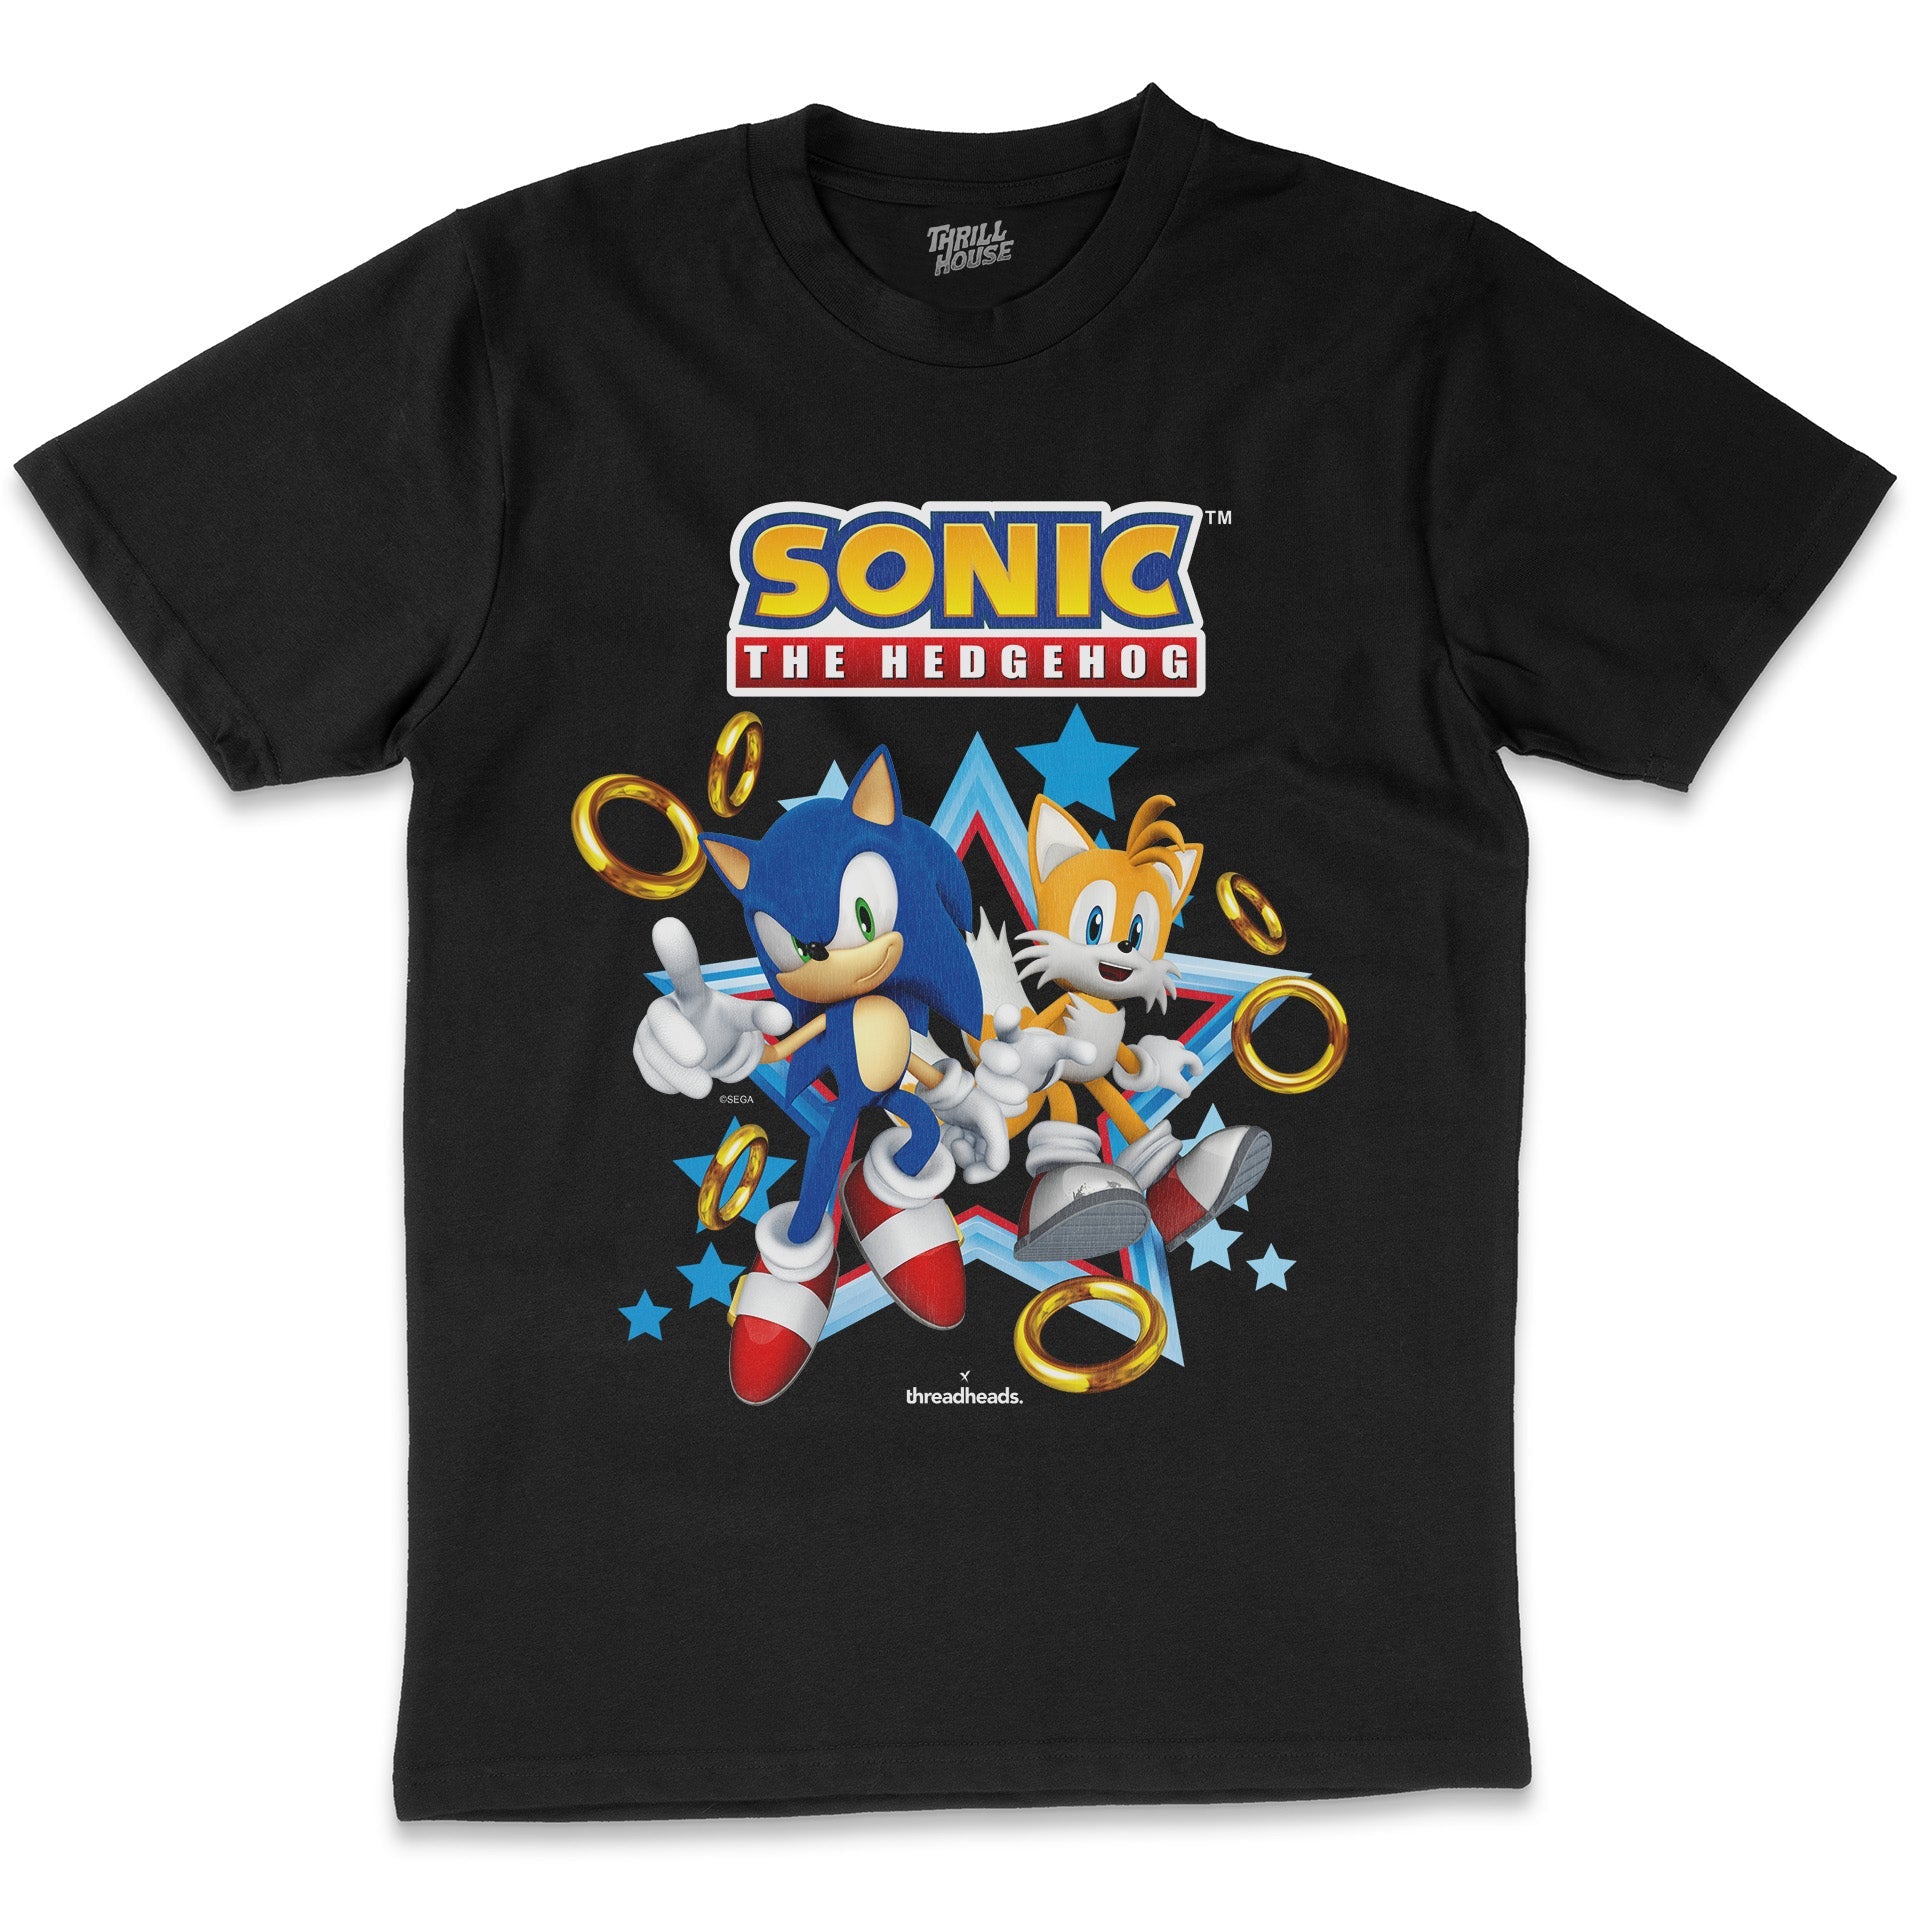 Sonic The Hedgehog Miles Tails Retro 90s Video Game Cartridge Console Officially Licensed SEGA T-Shirt